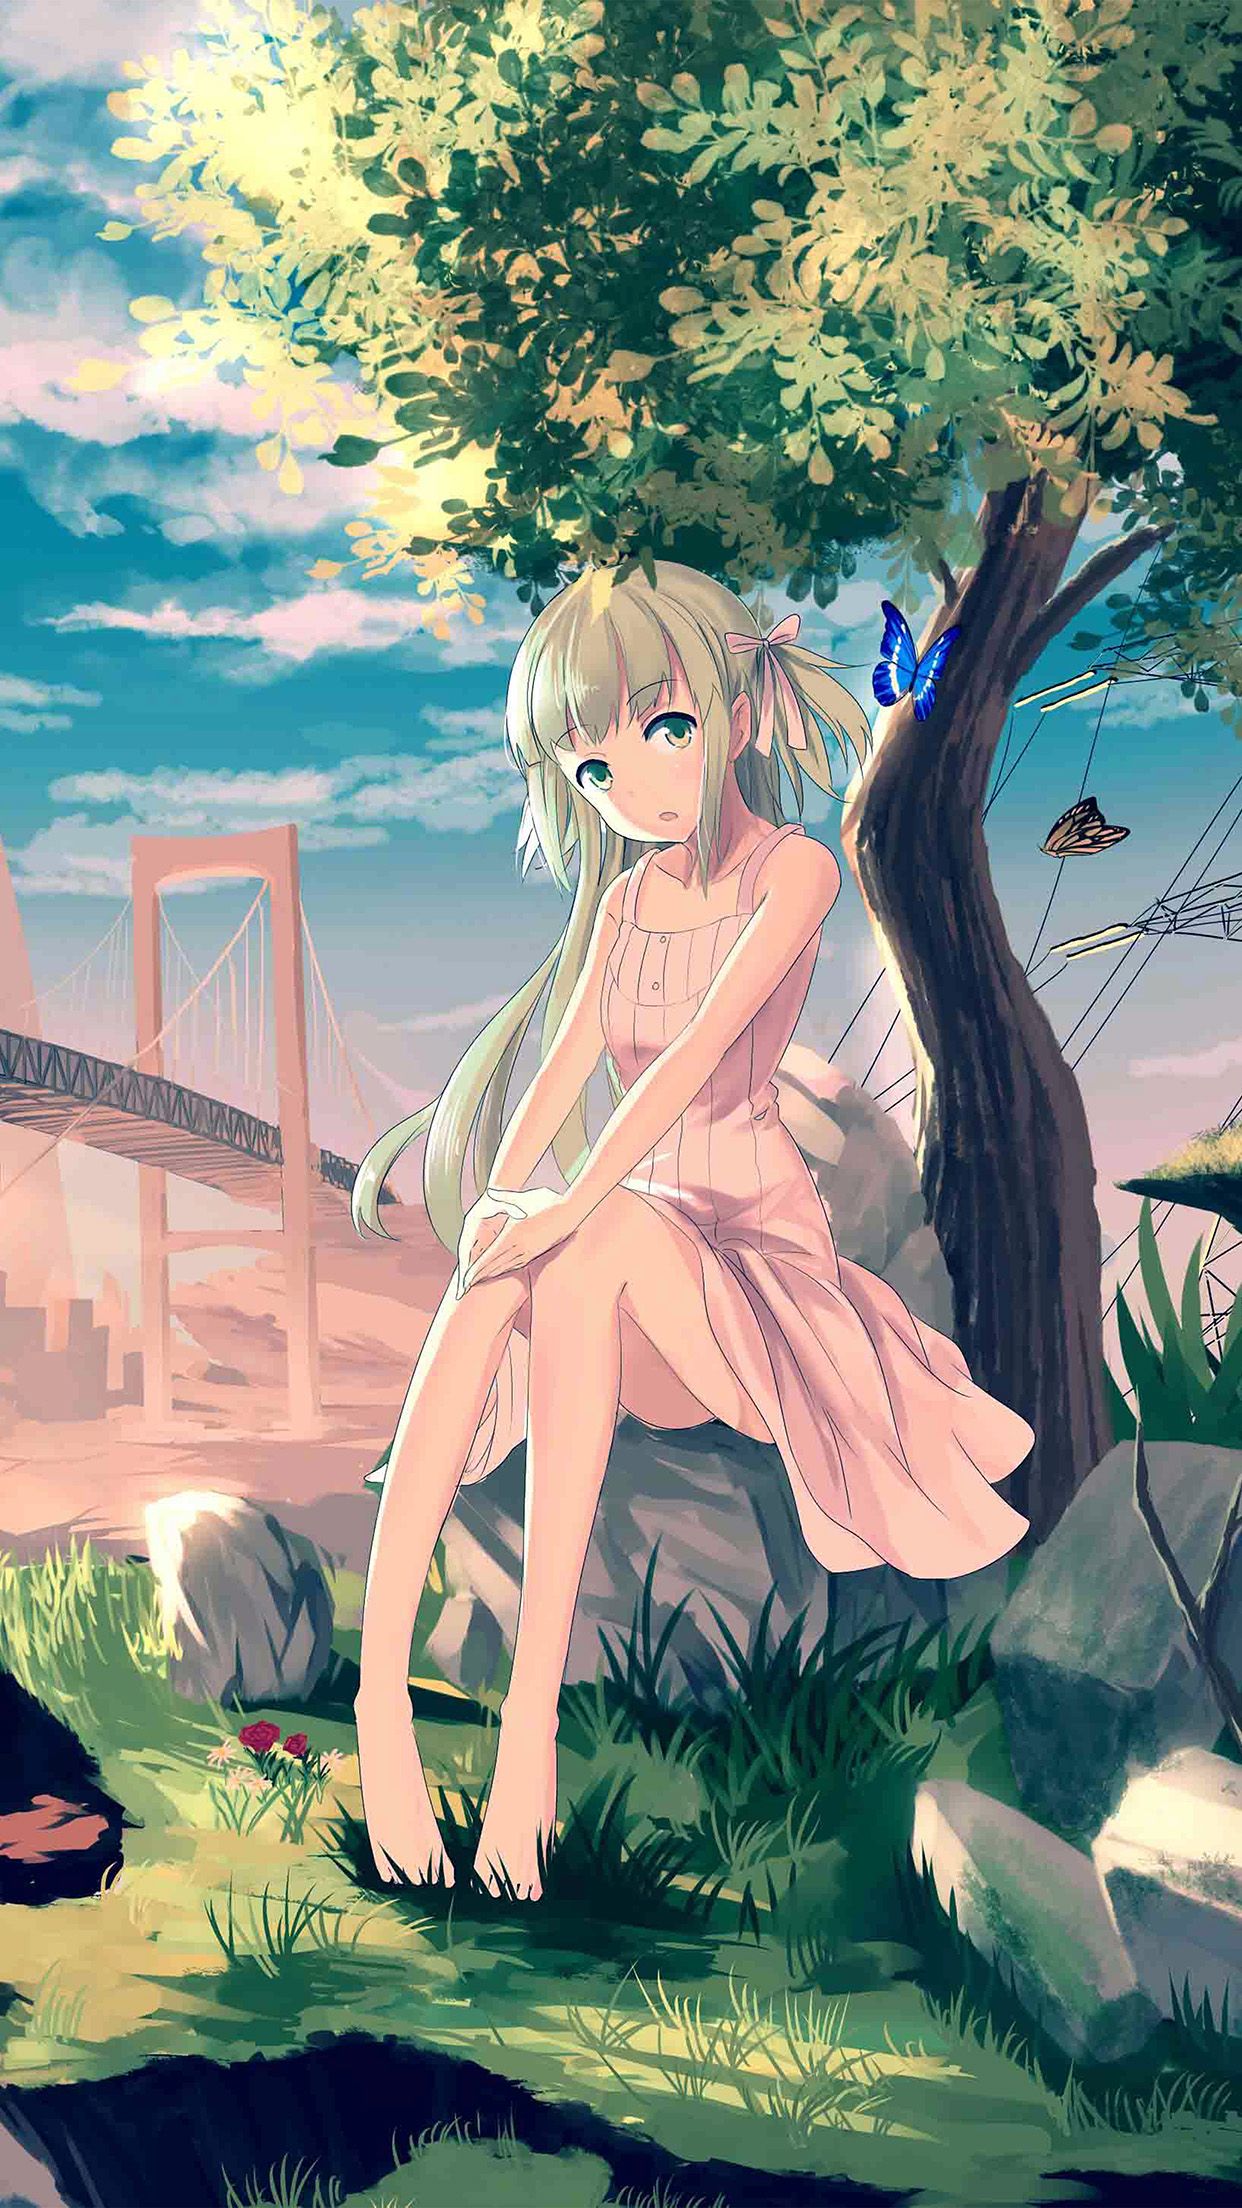 Cute Anime Wallpaper For Android